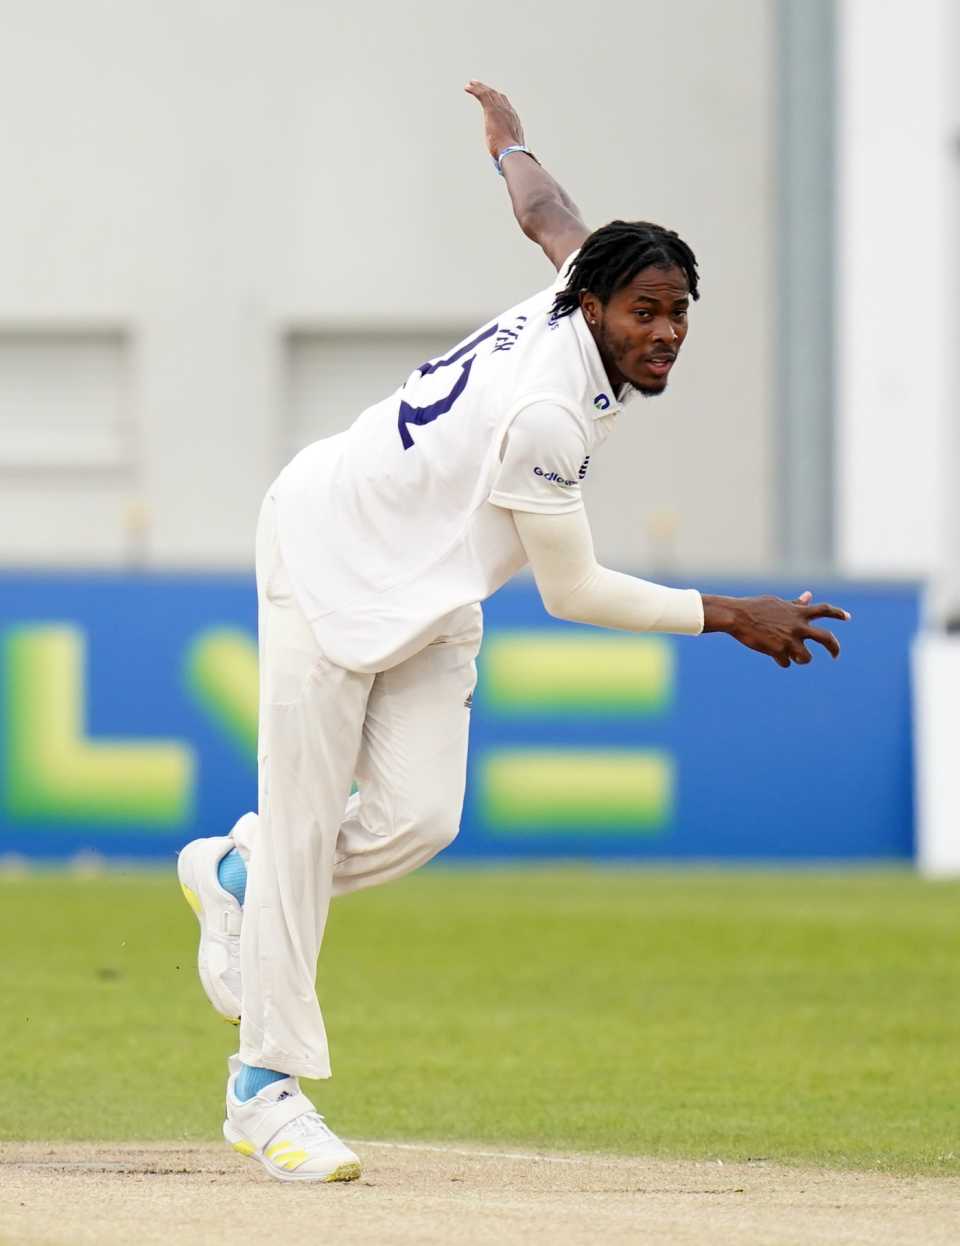 Jofra Archer was conspicuous by his absence from Sussex's attack on the third day